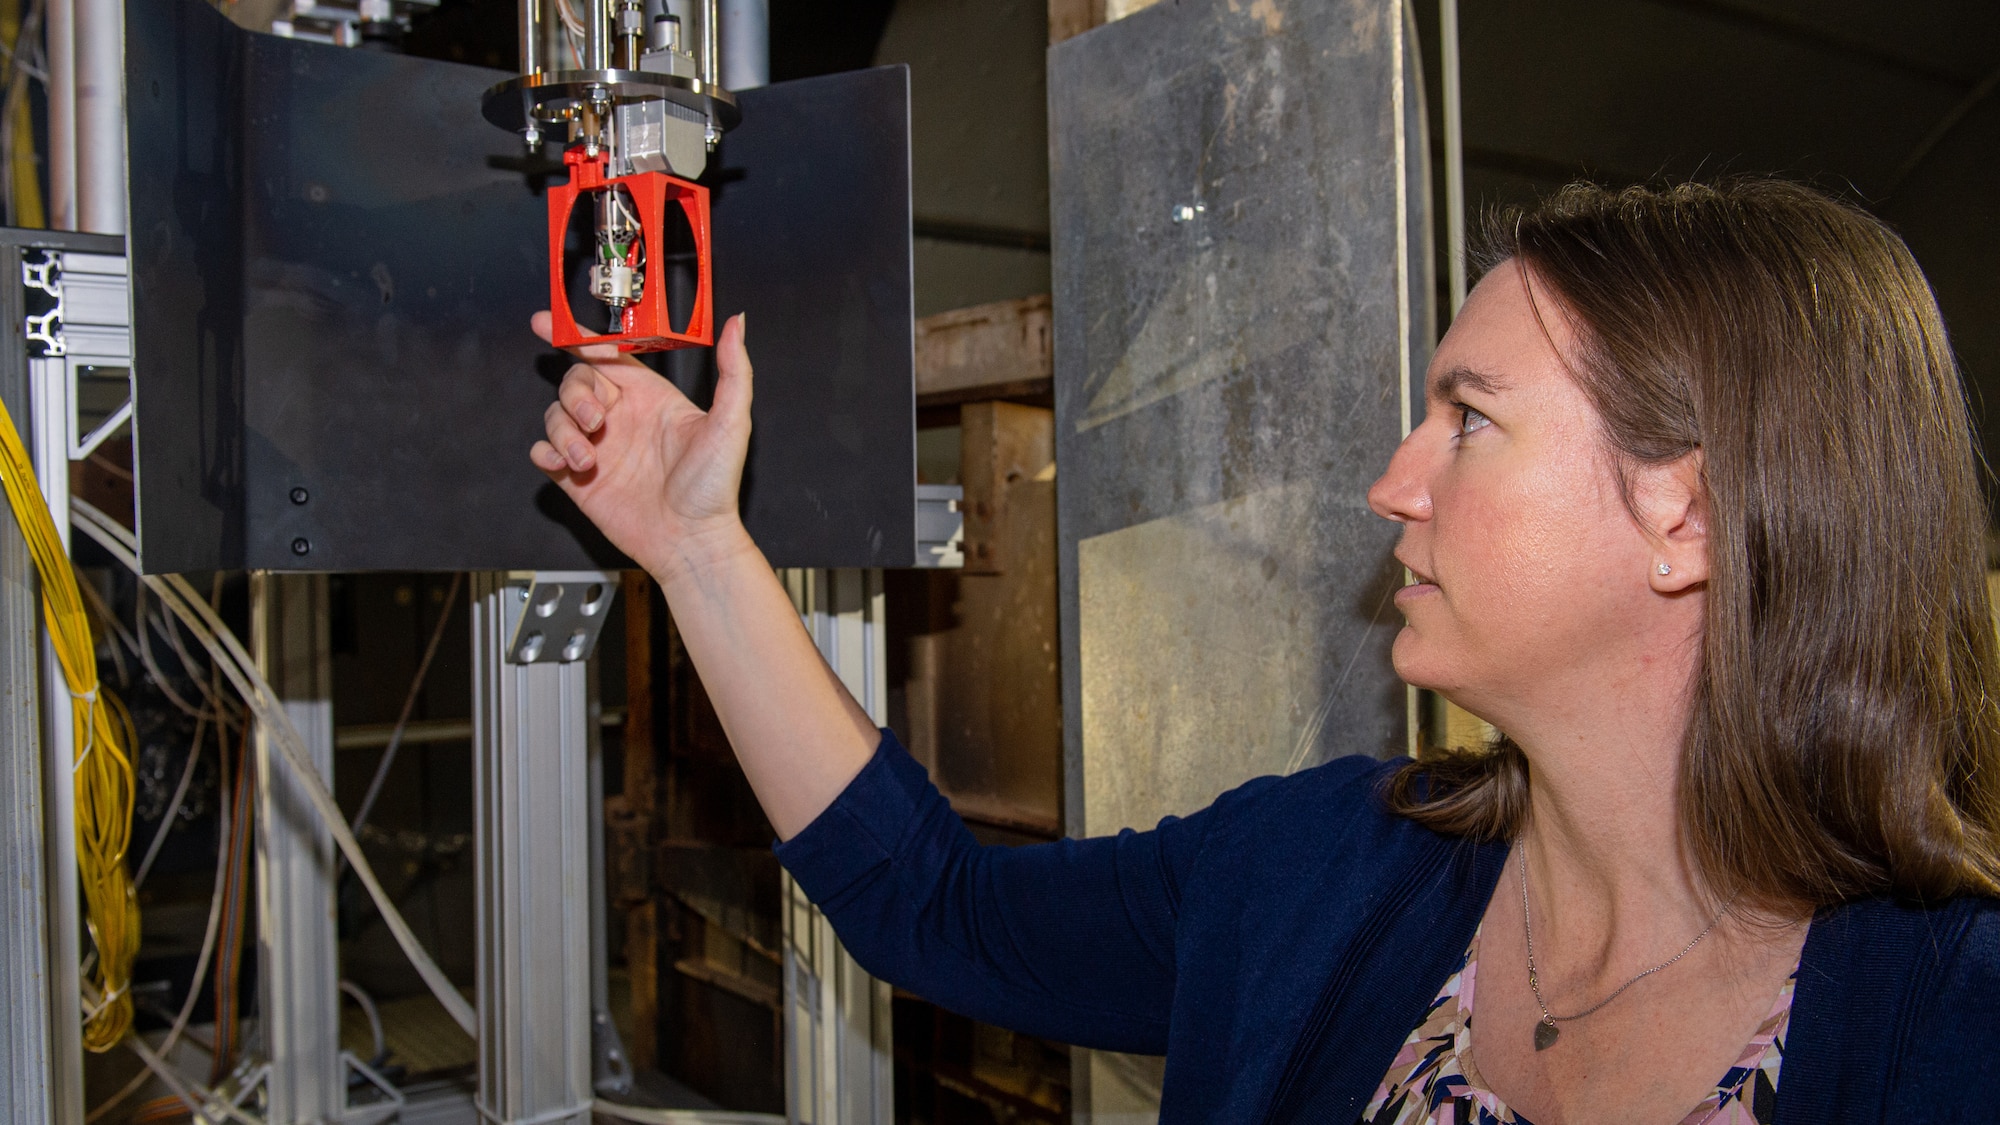 Corinne Sedano, group lead for Chemical Propulsion Flight Programs in the “In Space” Branch at AFRL’s Edwards AFB Rocket Lab facility, reviews AFRL’s test stand for One Newton Thrusters. The Chemical Propulsion Flight Programs Group has successfully completed the Advanced Spacecraft Energetic Non-toxic Propellant (ASCENT) monopropellant 1 Newton (1N) thruster testing in the Chemical in-Space Thruster Test and Research Site test facility. (U.S. Air Force photo/Josh McClanahan)